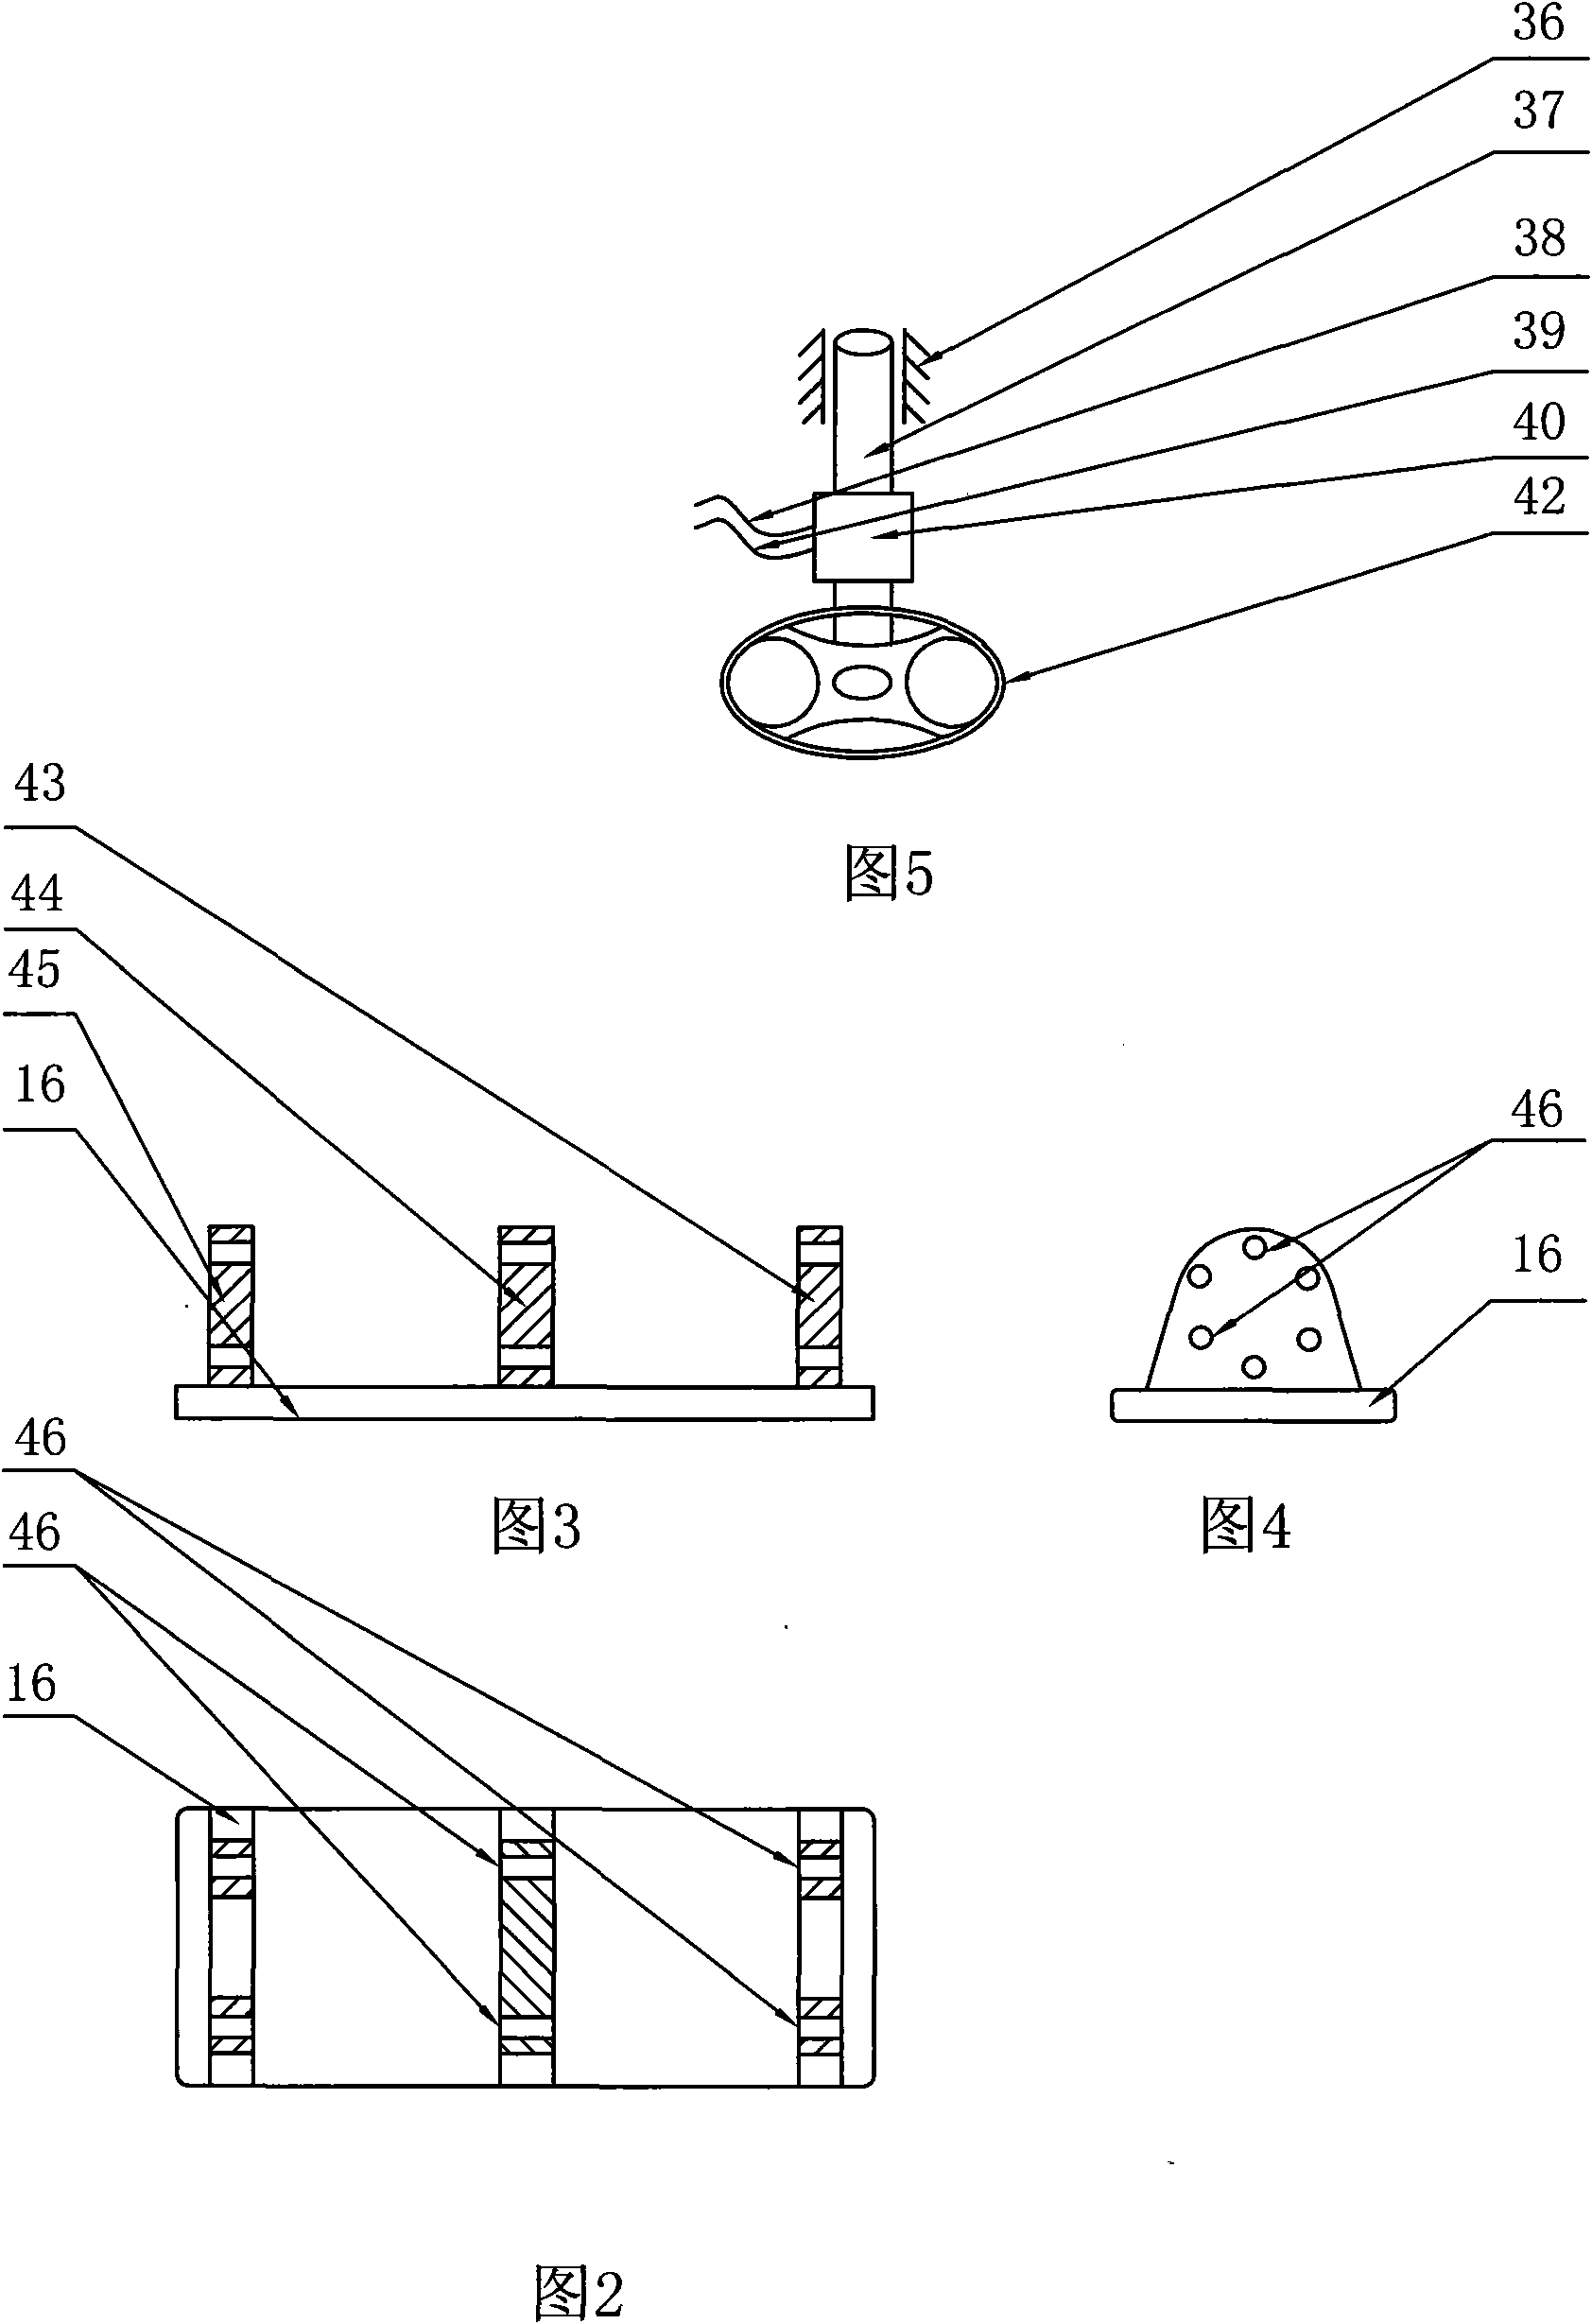 Electronic differential system based on relative slip ratio control